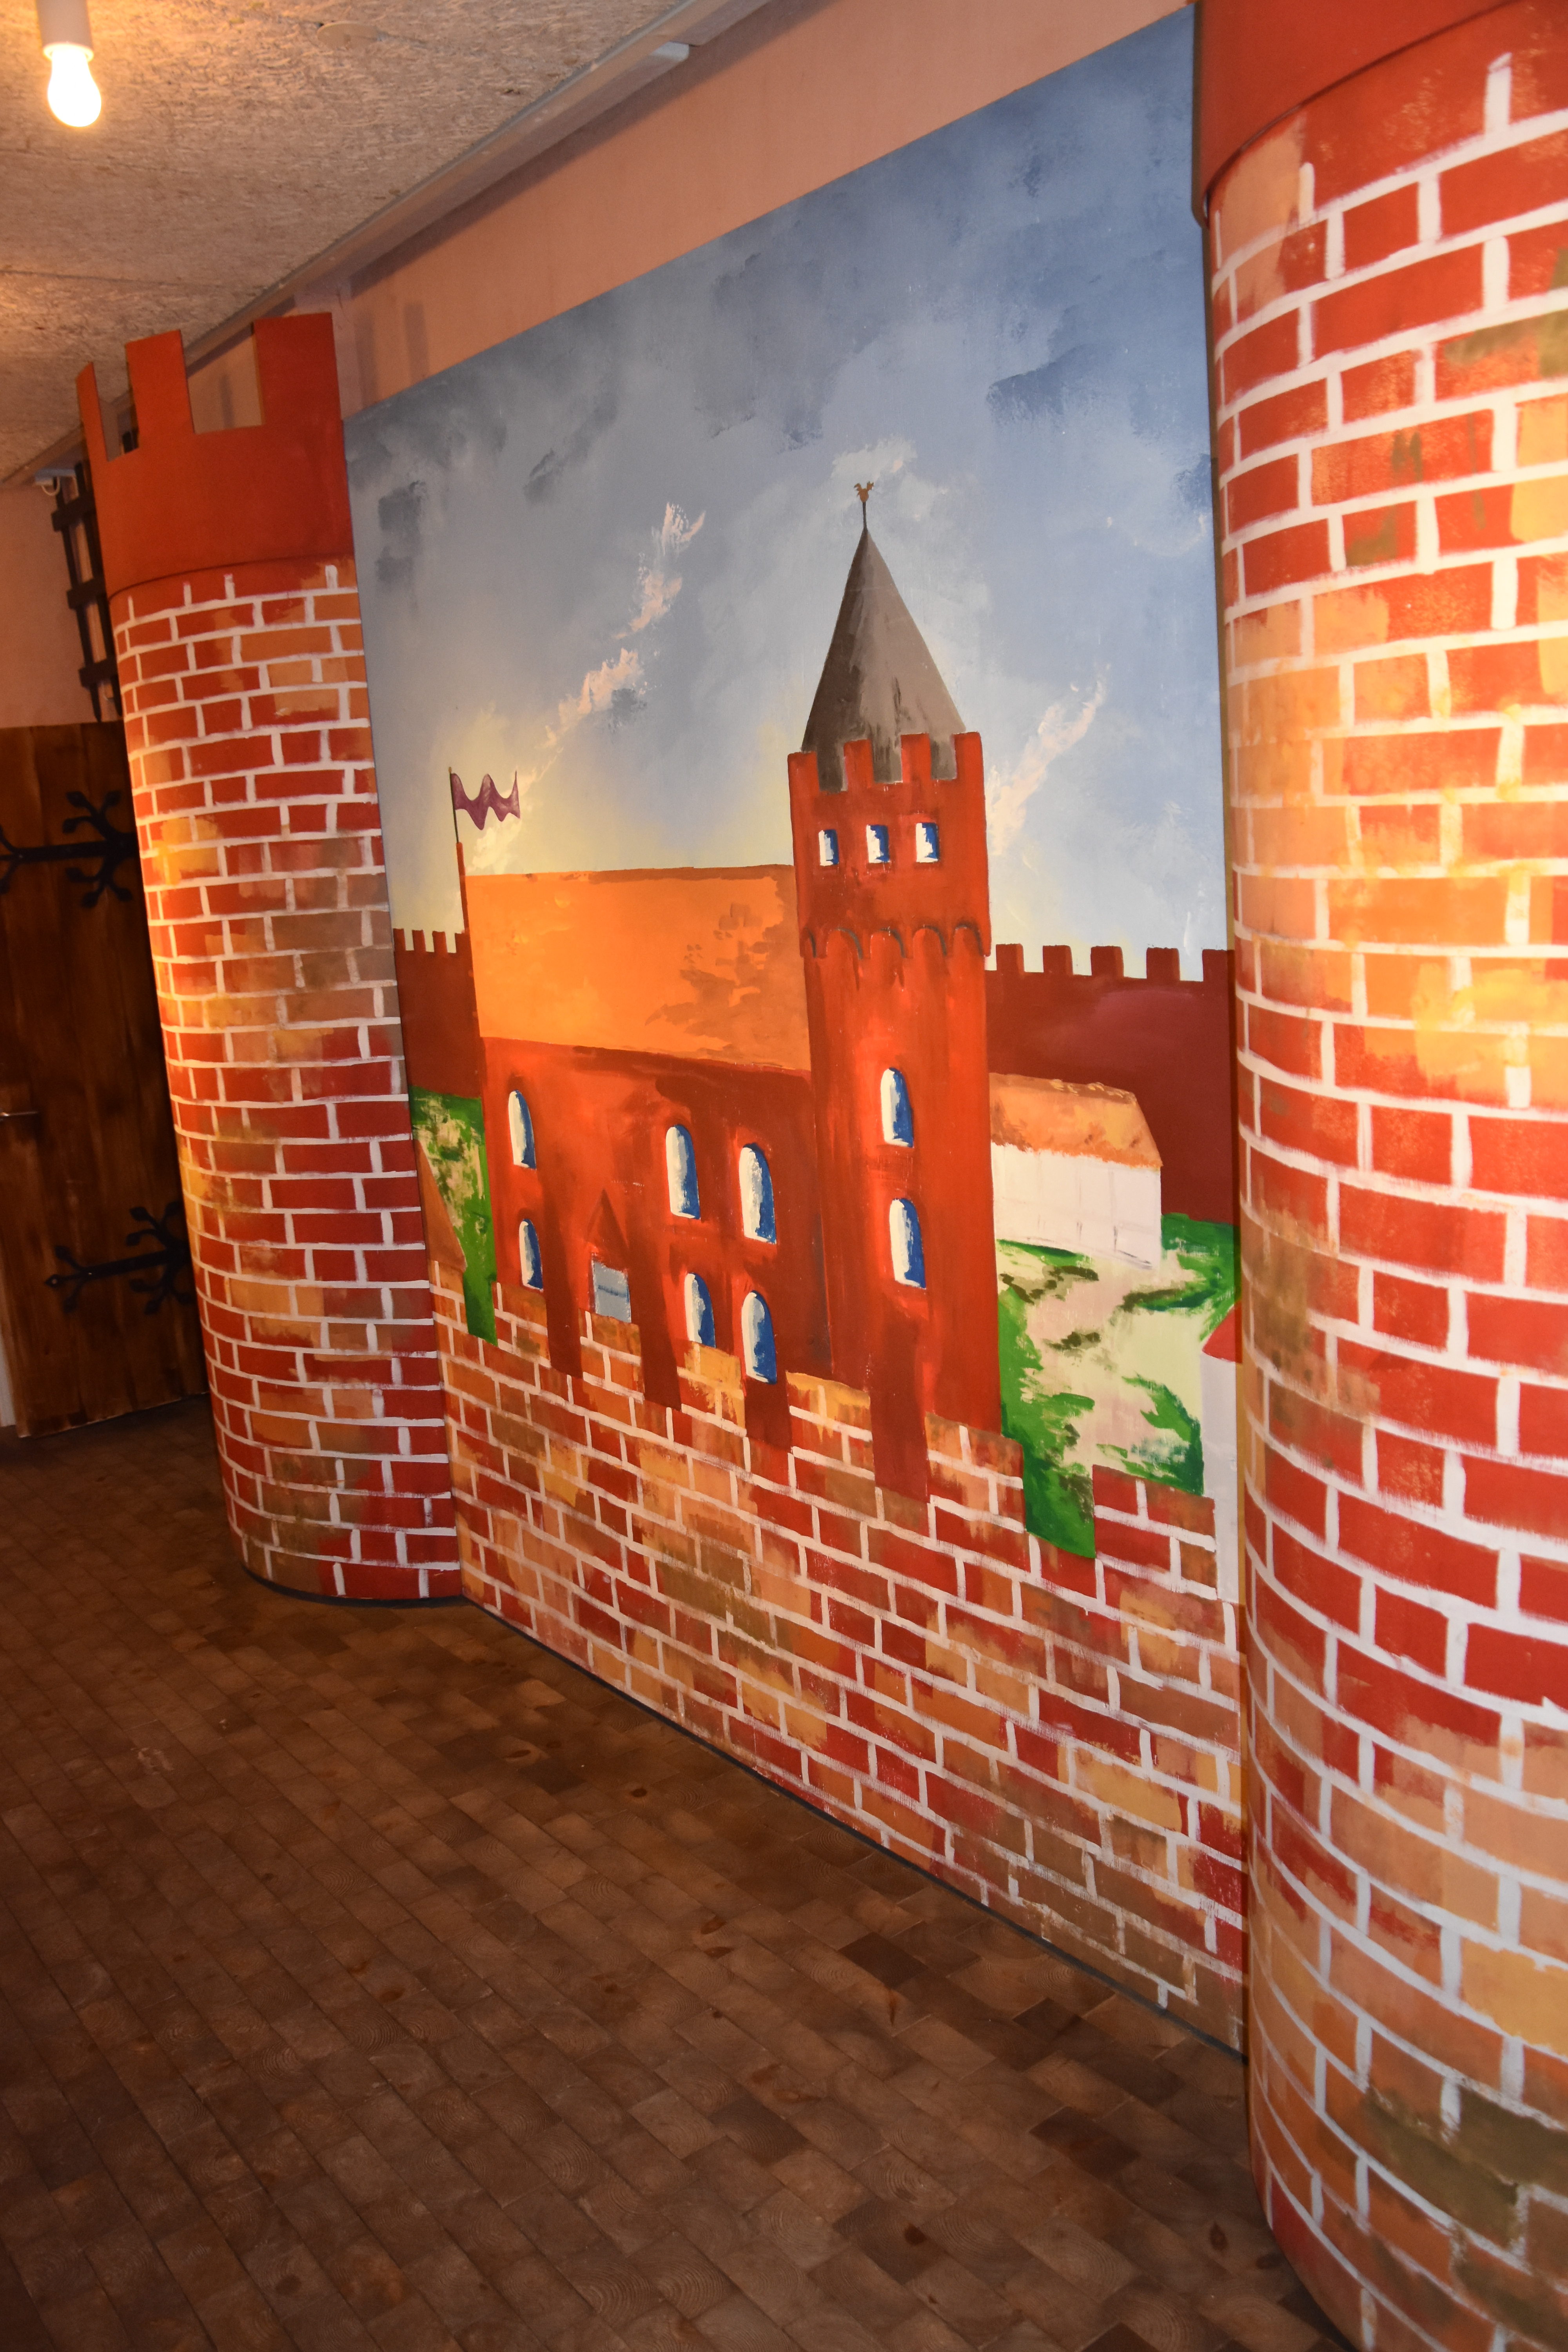 Entrance to the children's play area at the RIbe Viking Museum in Ribe, Denmark